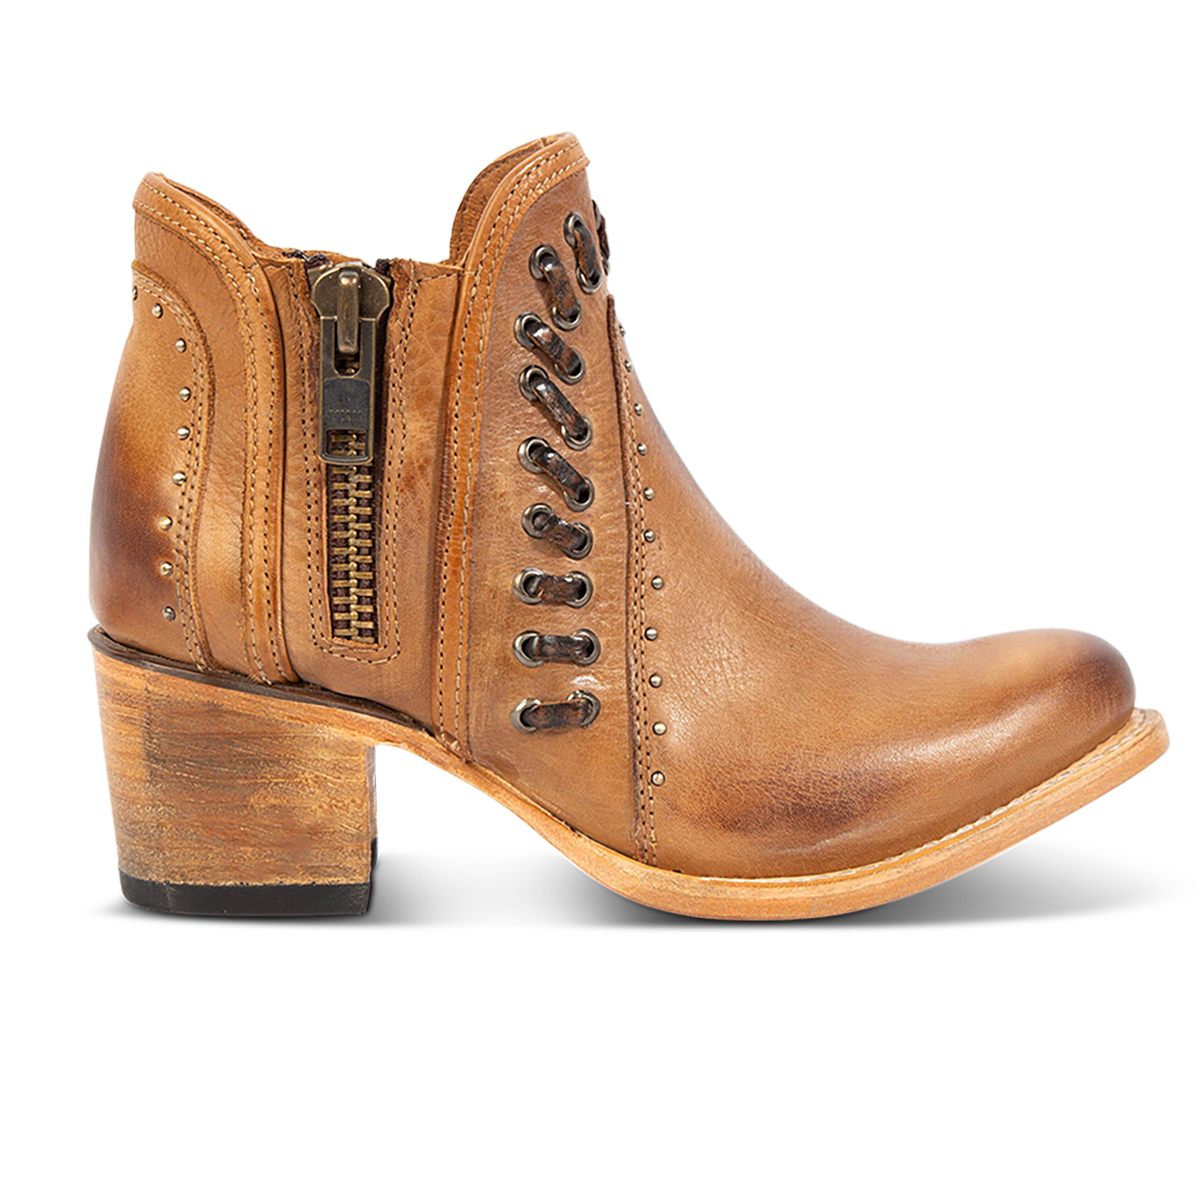 FREEBIRD women's Ryder wheat leather bootie with inside zip closures, eyelet whip stitch leather detailing and an almond toe.